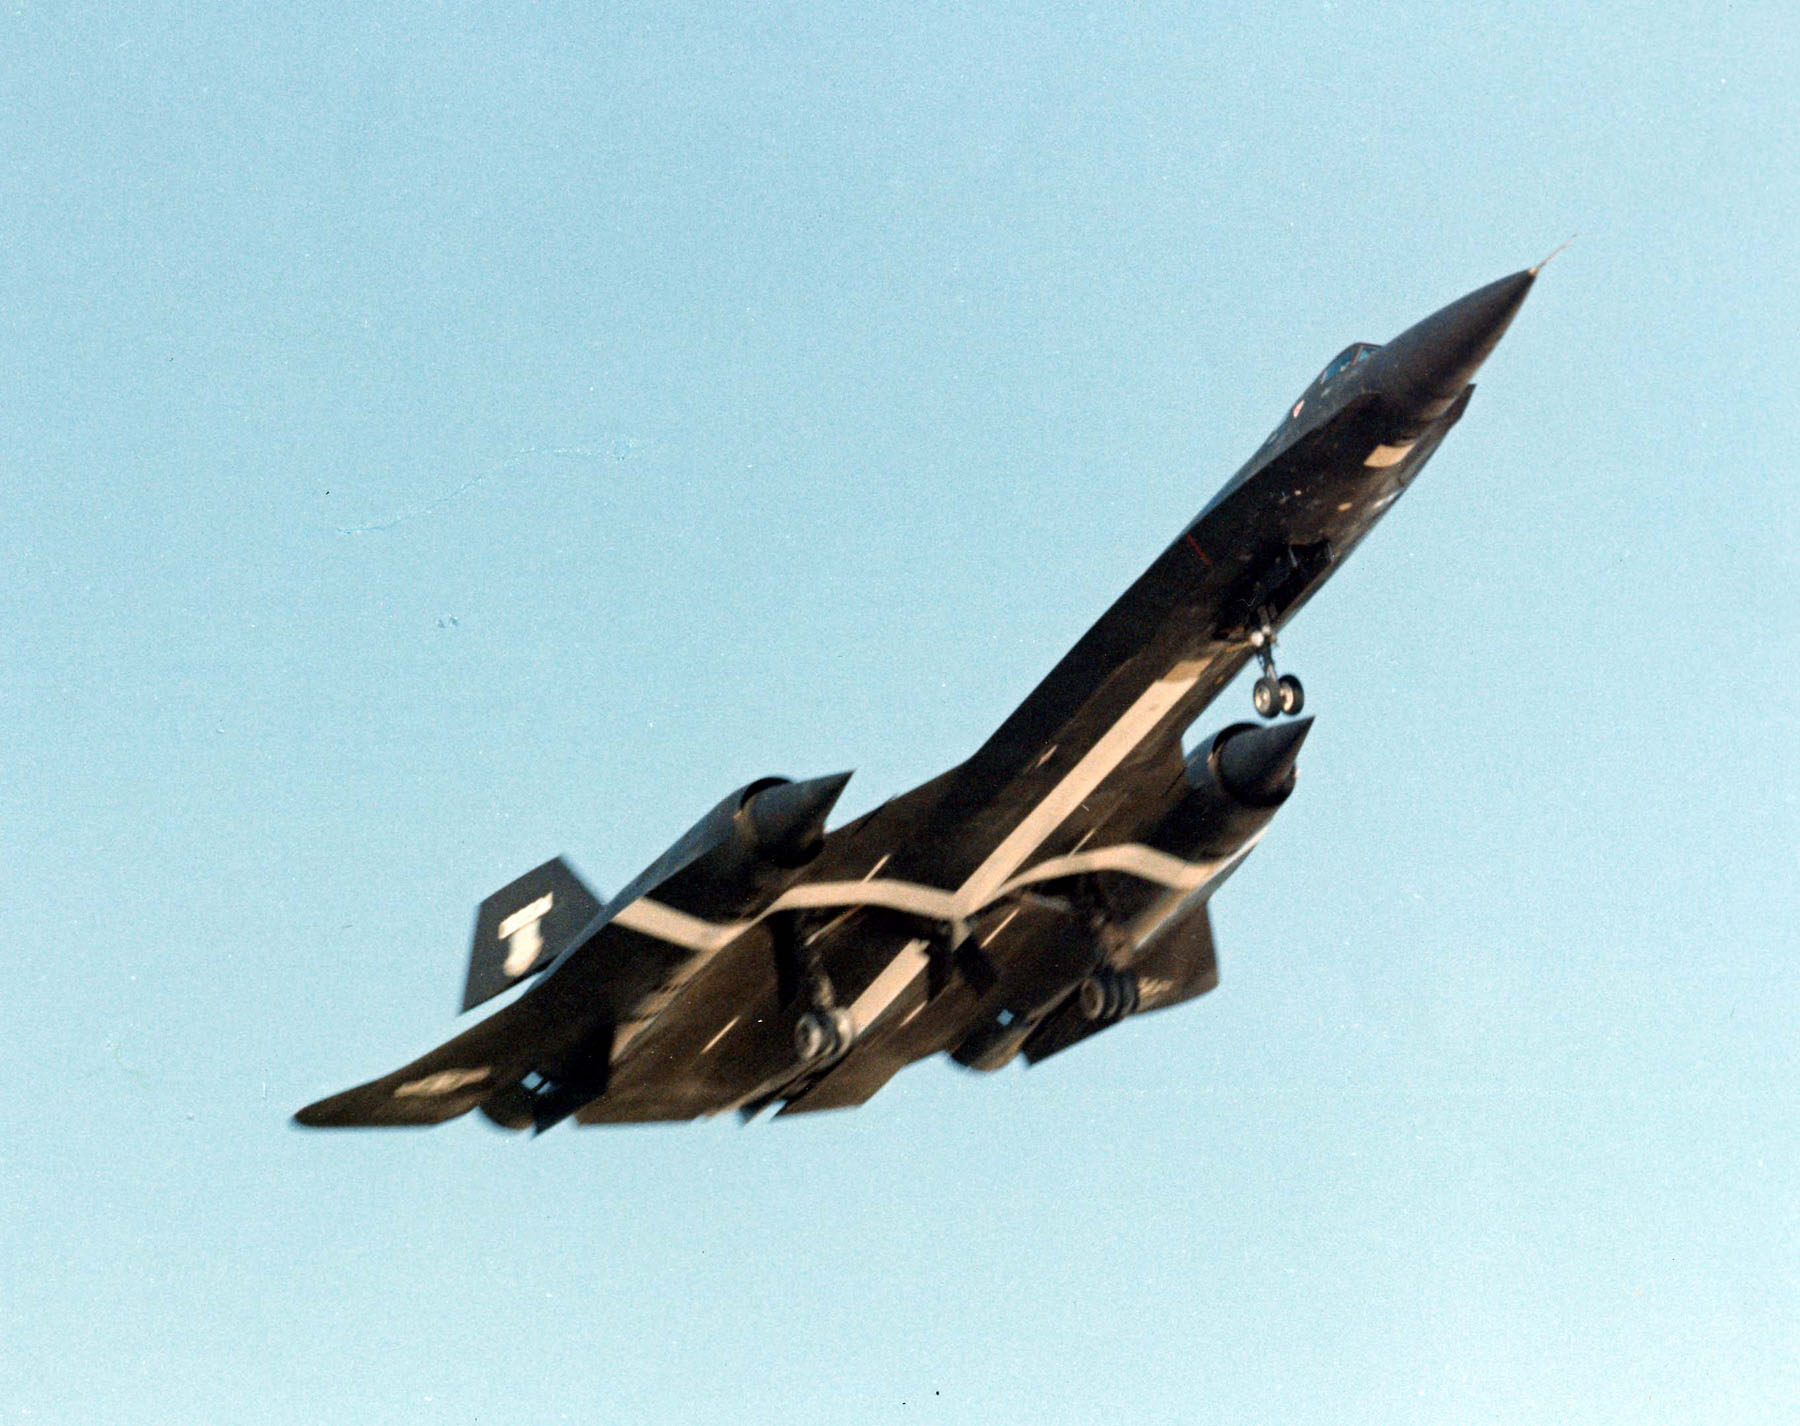 Lockheed YF-12A 60-6936 during speed record trials. The white cross on the aircraft's belly was to assist timers and observers. (U.S. Air Force) 